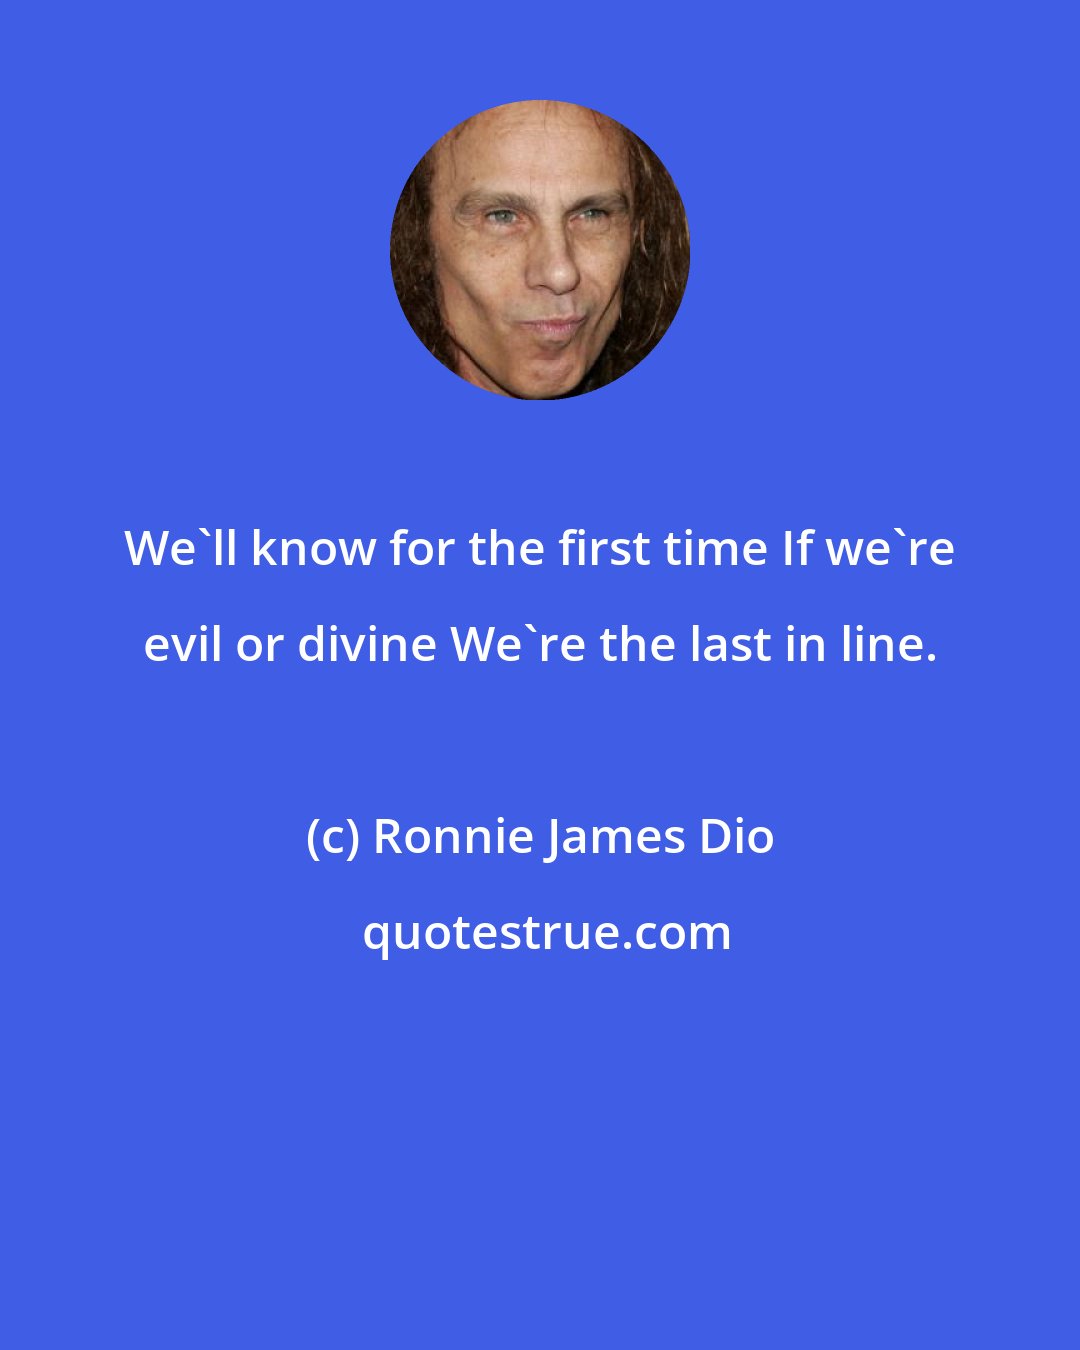 Ronnie James Dio: We'll know for the first time If we're evil or divine We're the last in line.